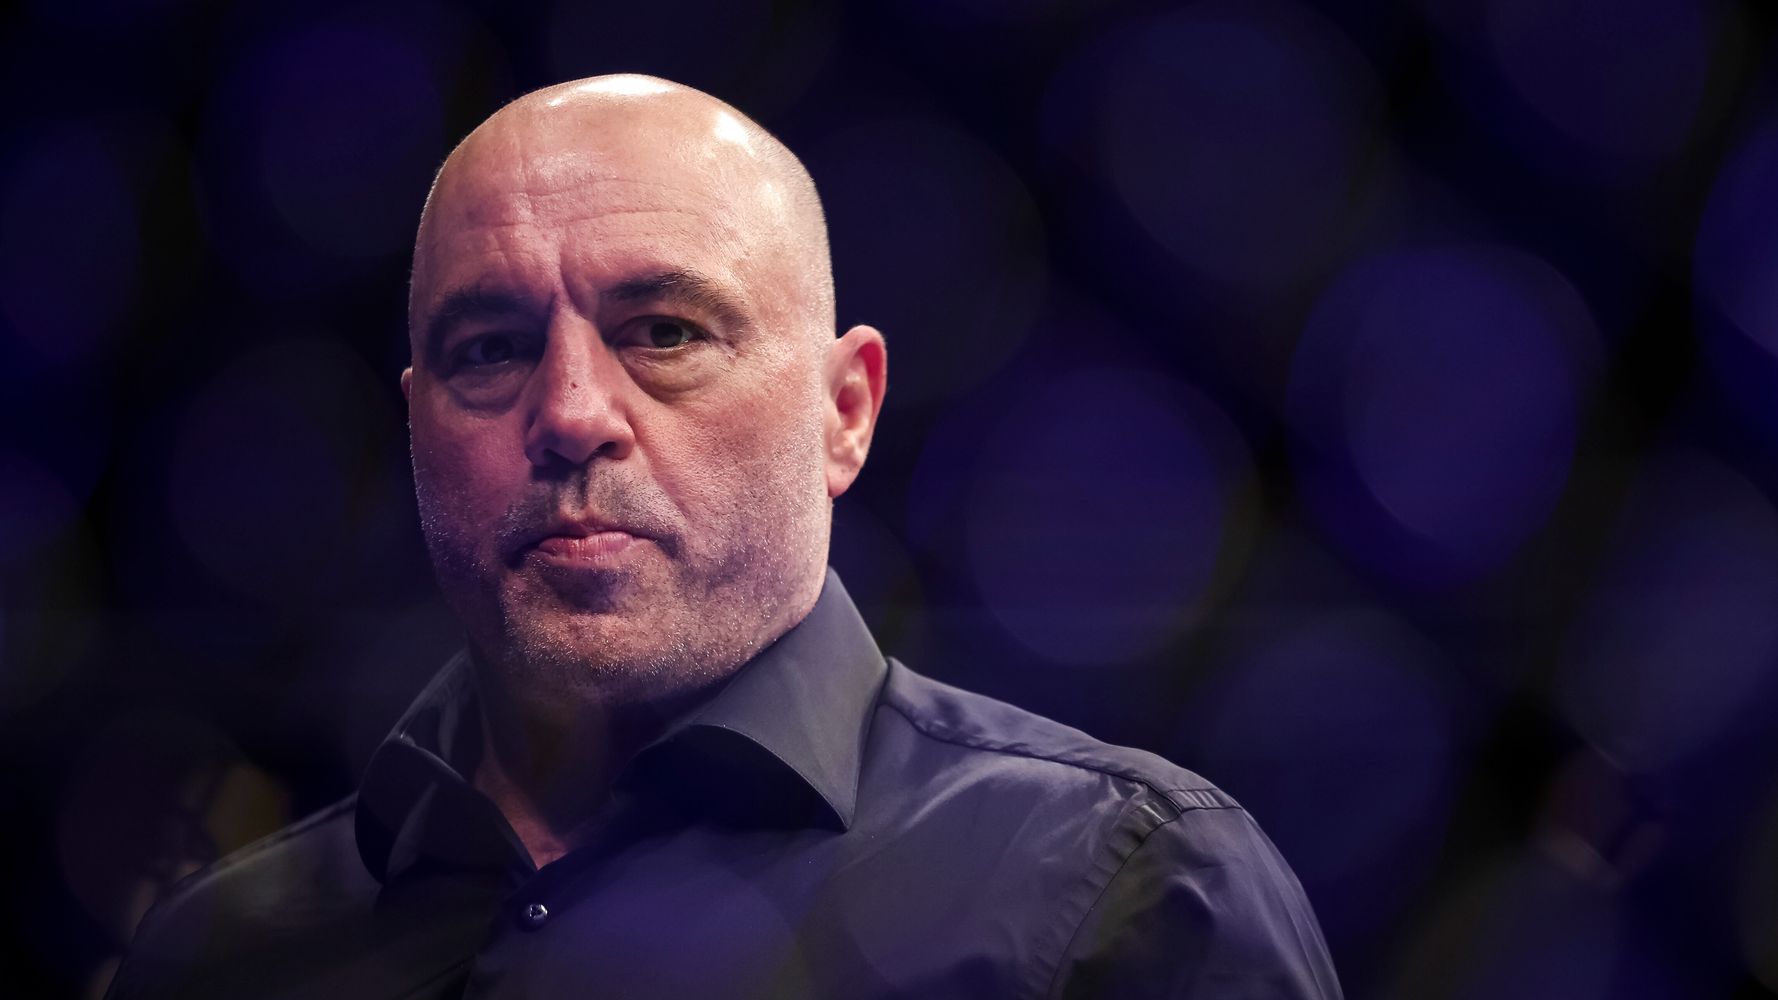 Joe Rogan Claims Recent Controversies Helped Grow His Huge Spotify Subscriber Base